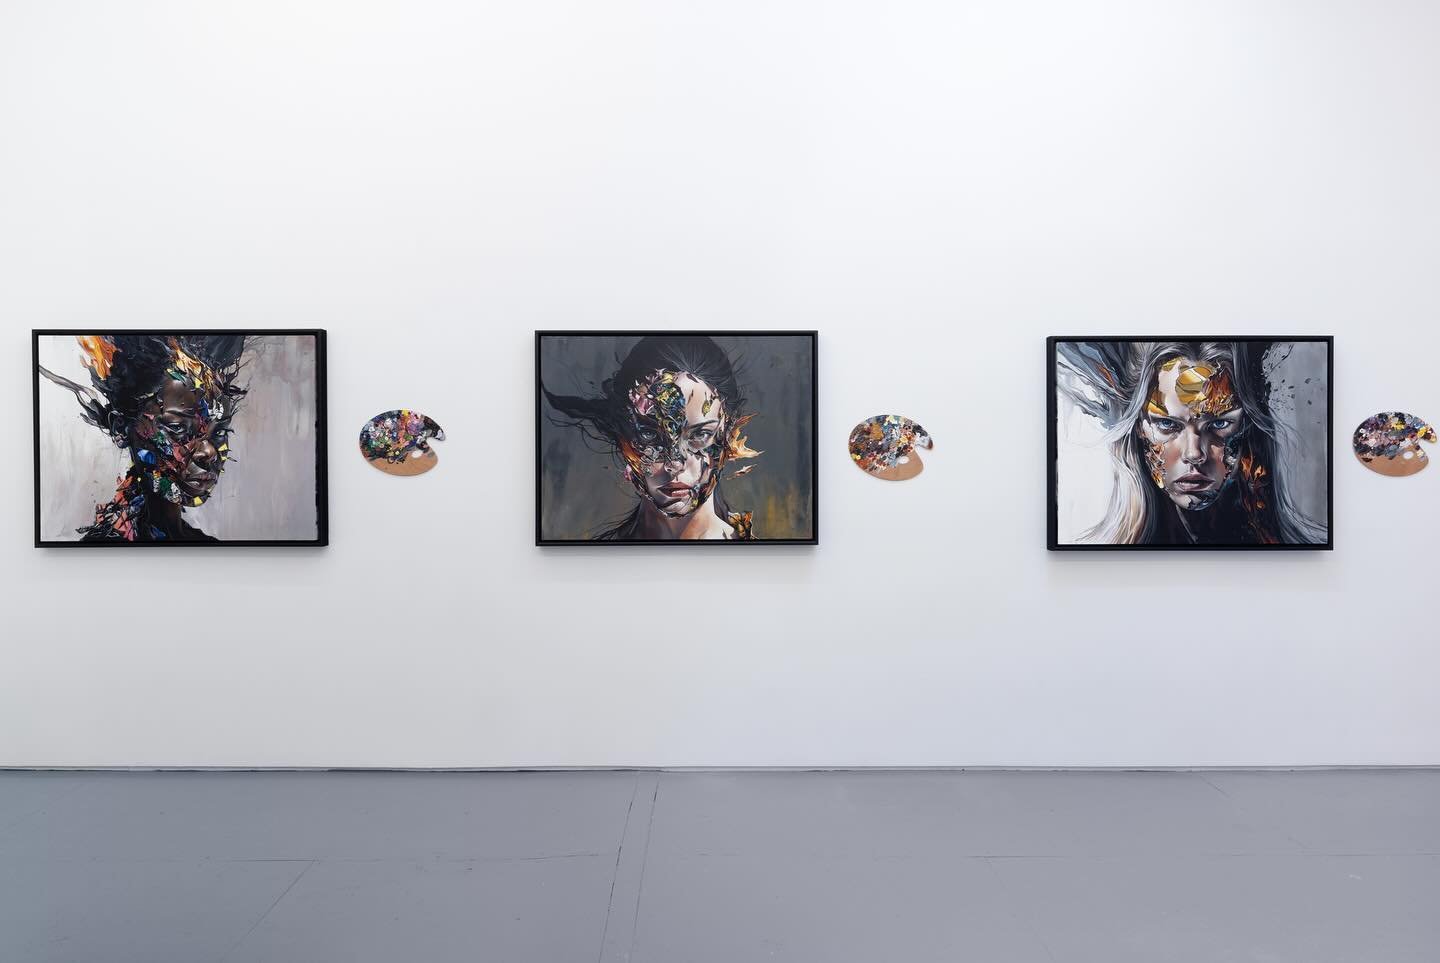 JUXTAPOZ  magazine features &ldquo;It takes courage, unity, and a belief in justice&rdquo;: An Interview with Sandra Chevrier on her latest exhibition &laquo;&nbsp;Birds on Cages&nbsp;&raquo; ▪️Harman Projects: Something you mentioned about this late